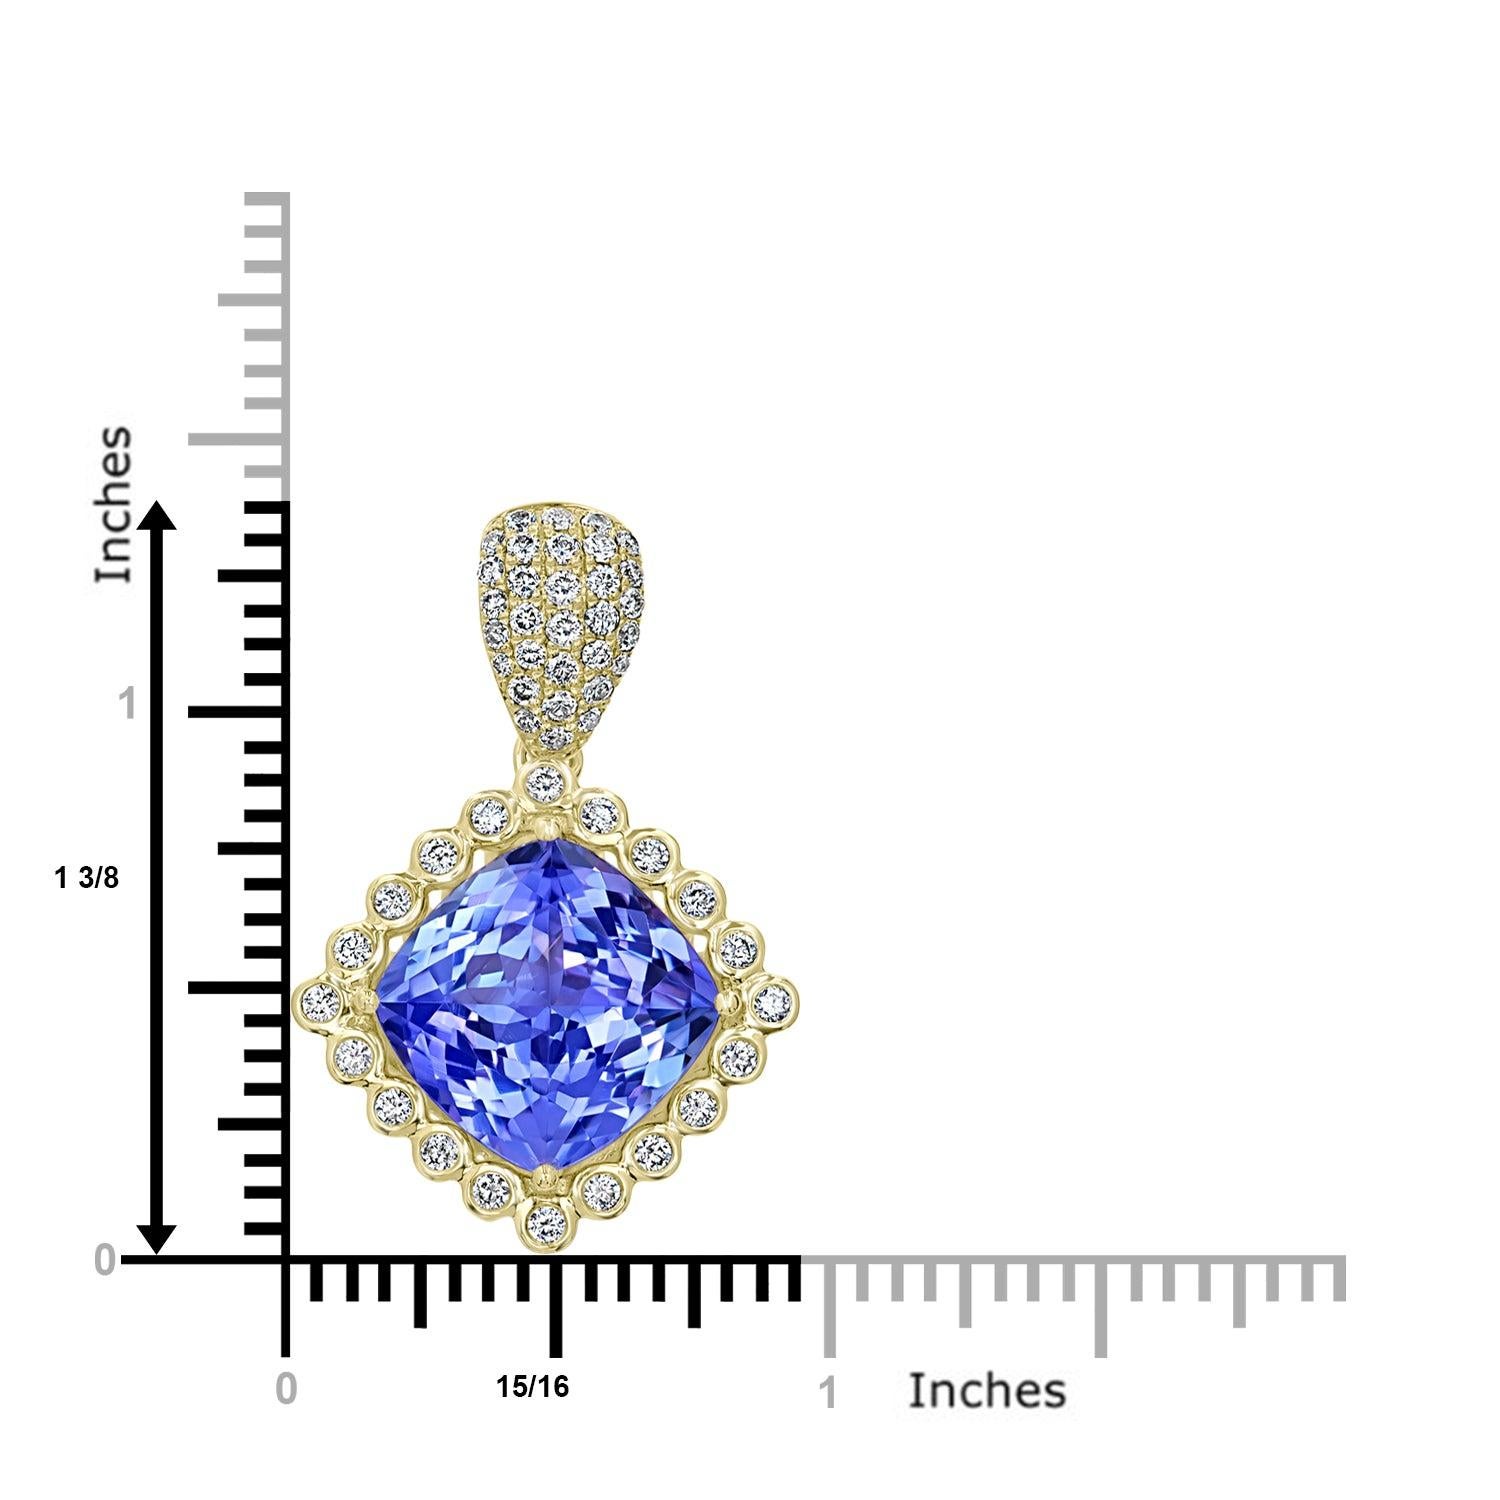 If you're looking for a truly unique and stunning piece of jewelry, look no further than this beautiful 10.61ct Tanzanite Pendant. Tanzanite is a rare and highly sought-after gemstone, known for its striking violet-blue color. 

The 0.83ct diamonds